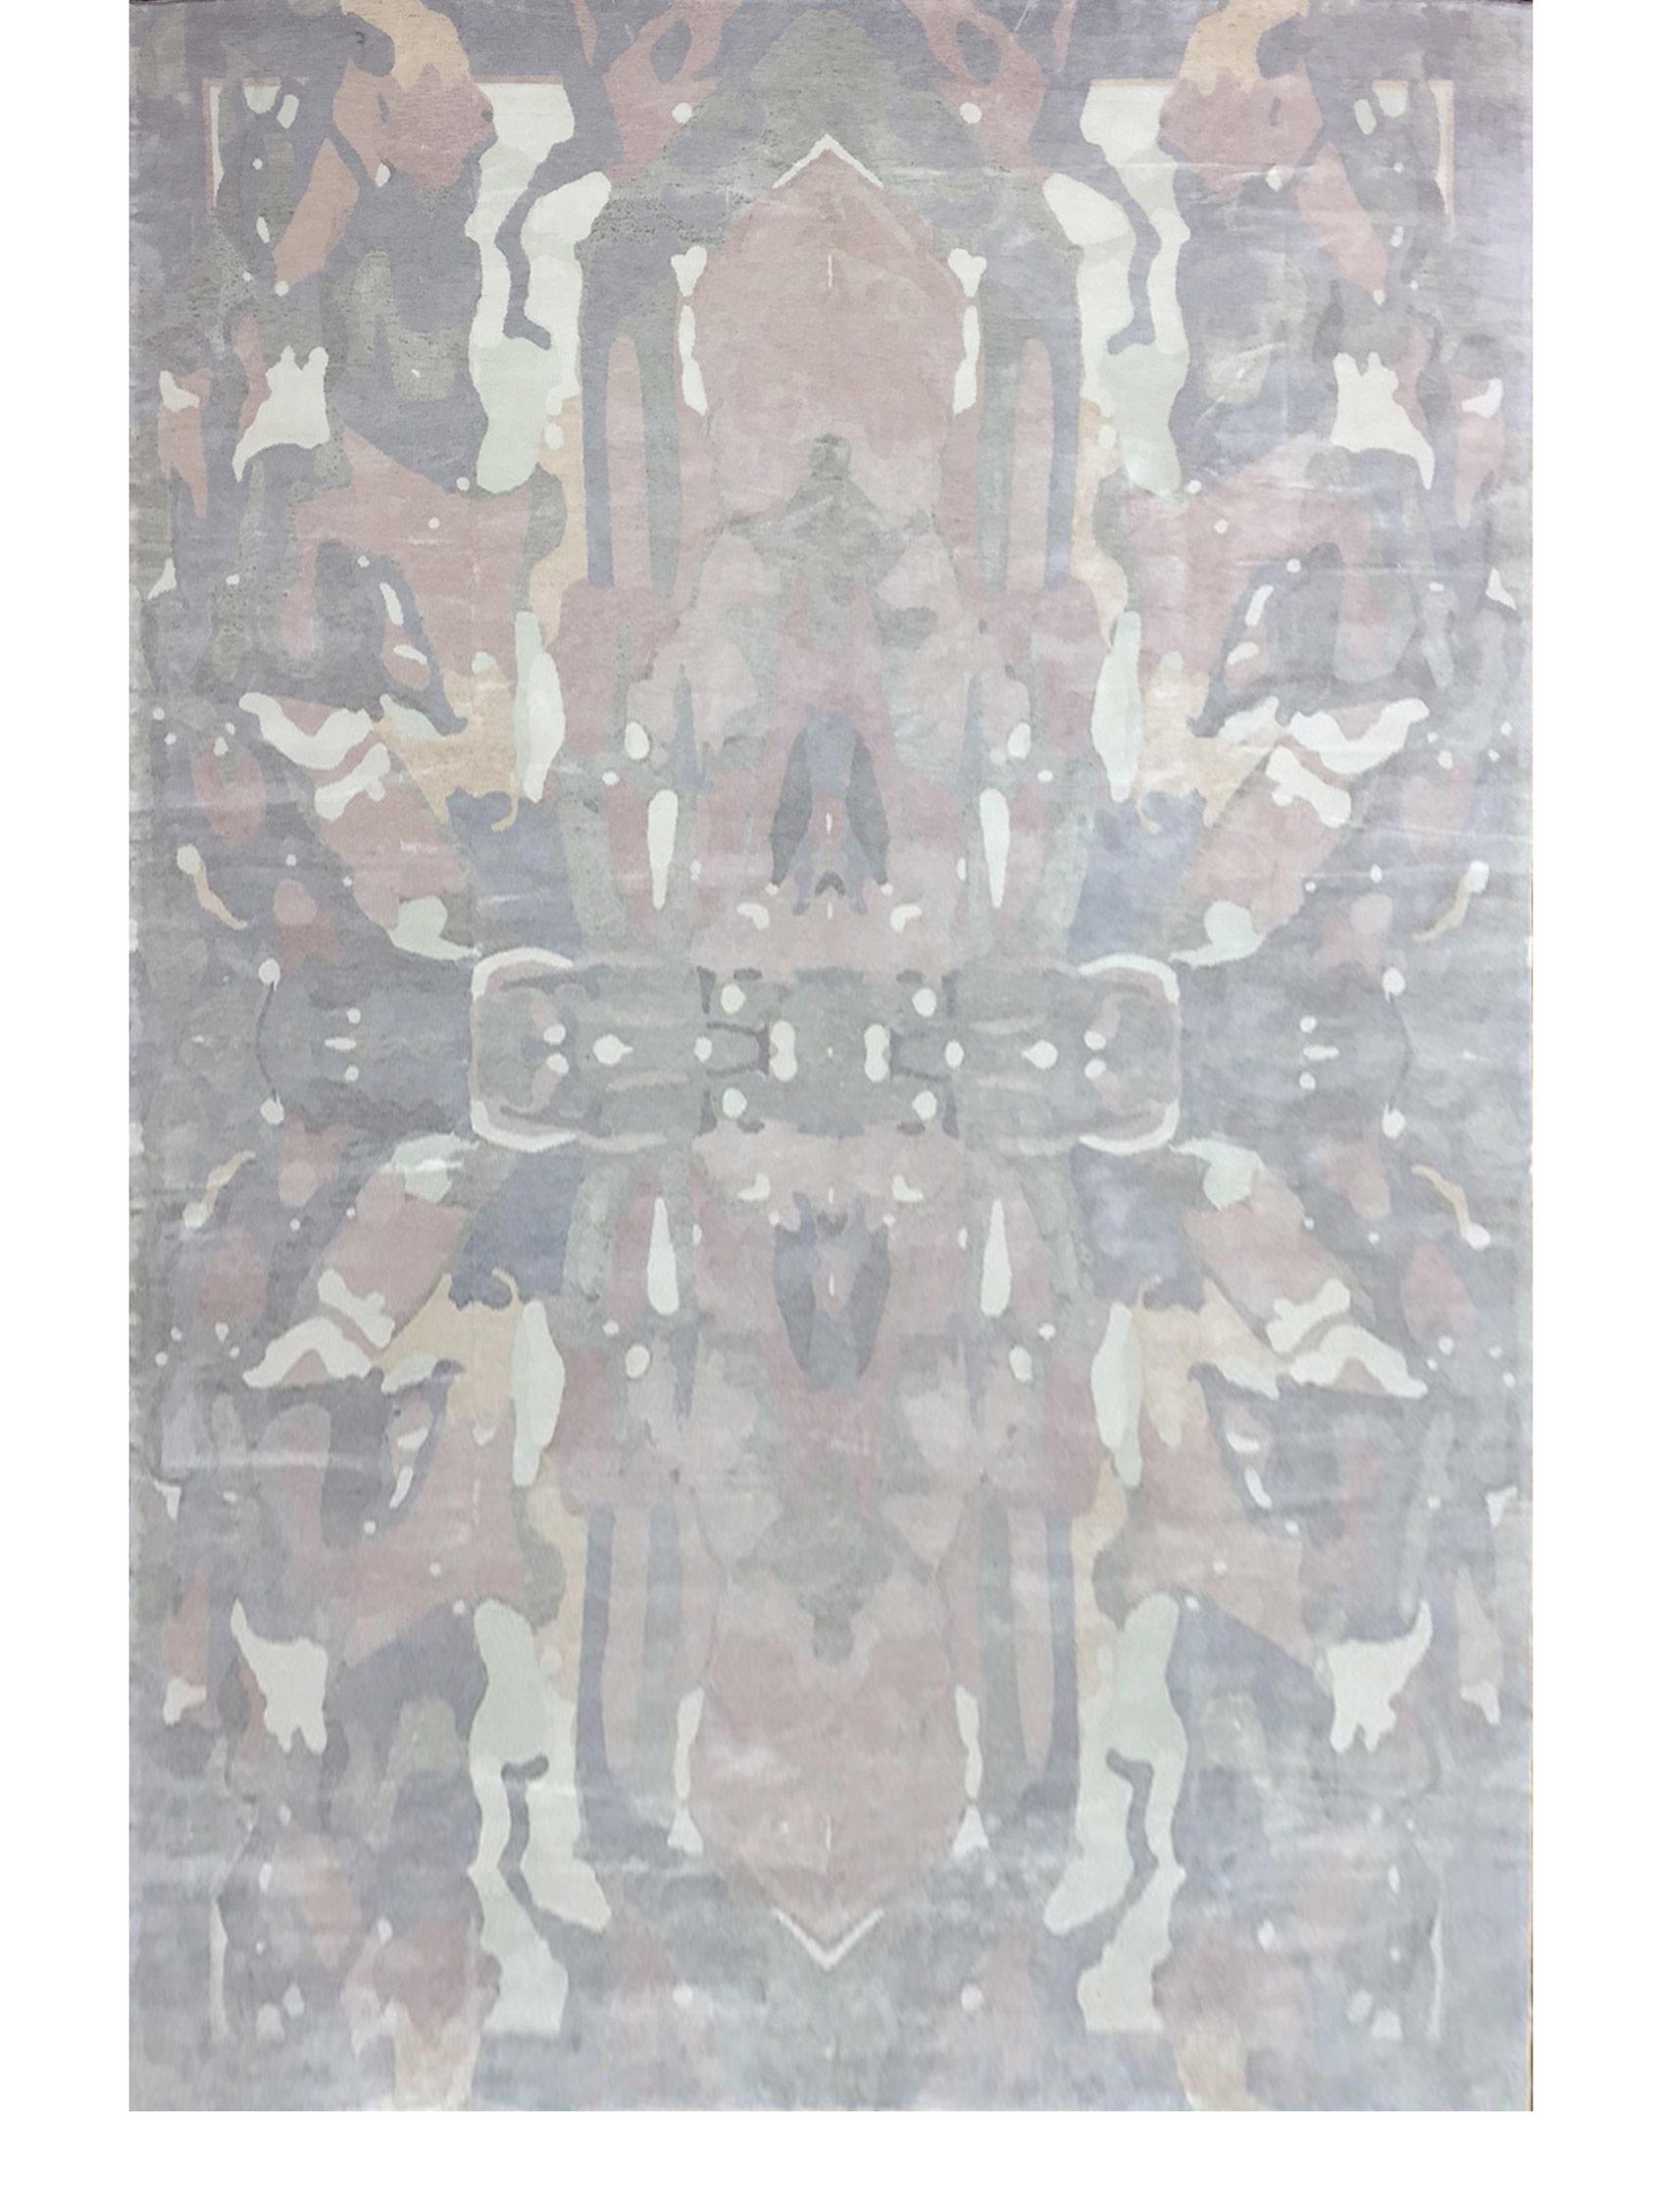 Tamandot Lumier hand knotted Rug by Eskayel
Dimensions: D 11' x H 17'
Pile Height: 6 mm.
Materials: 70% Merino wool, 30% silk.

Eskayel hand knotted rugs are woven to order and can be customized in various sizes, colors, materials, and weave